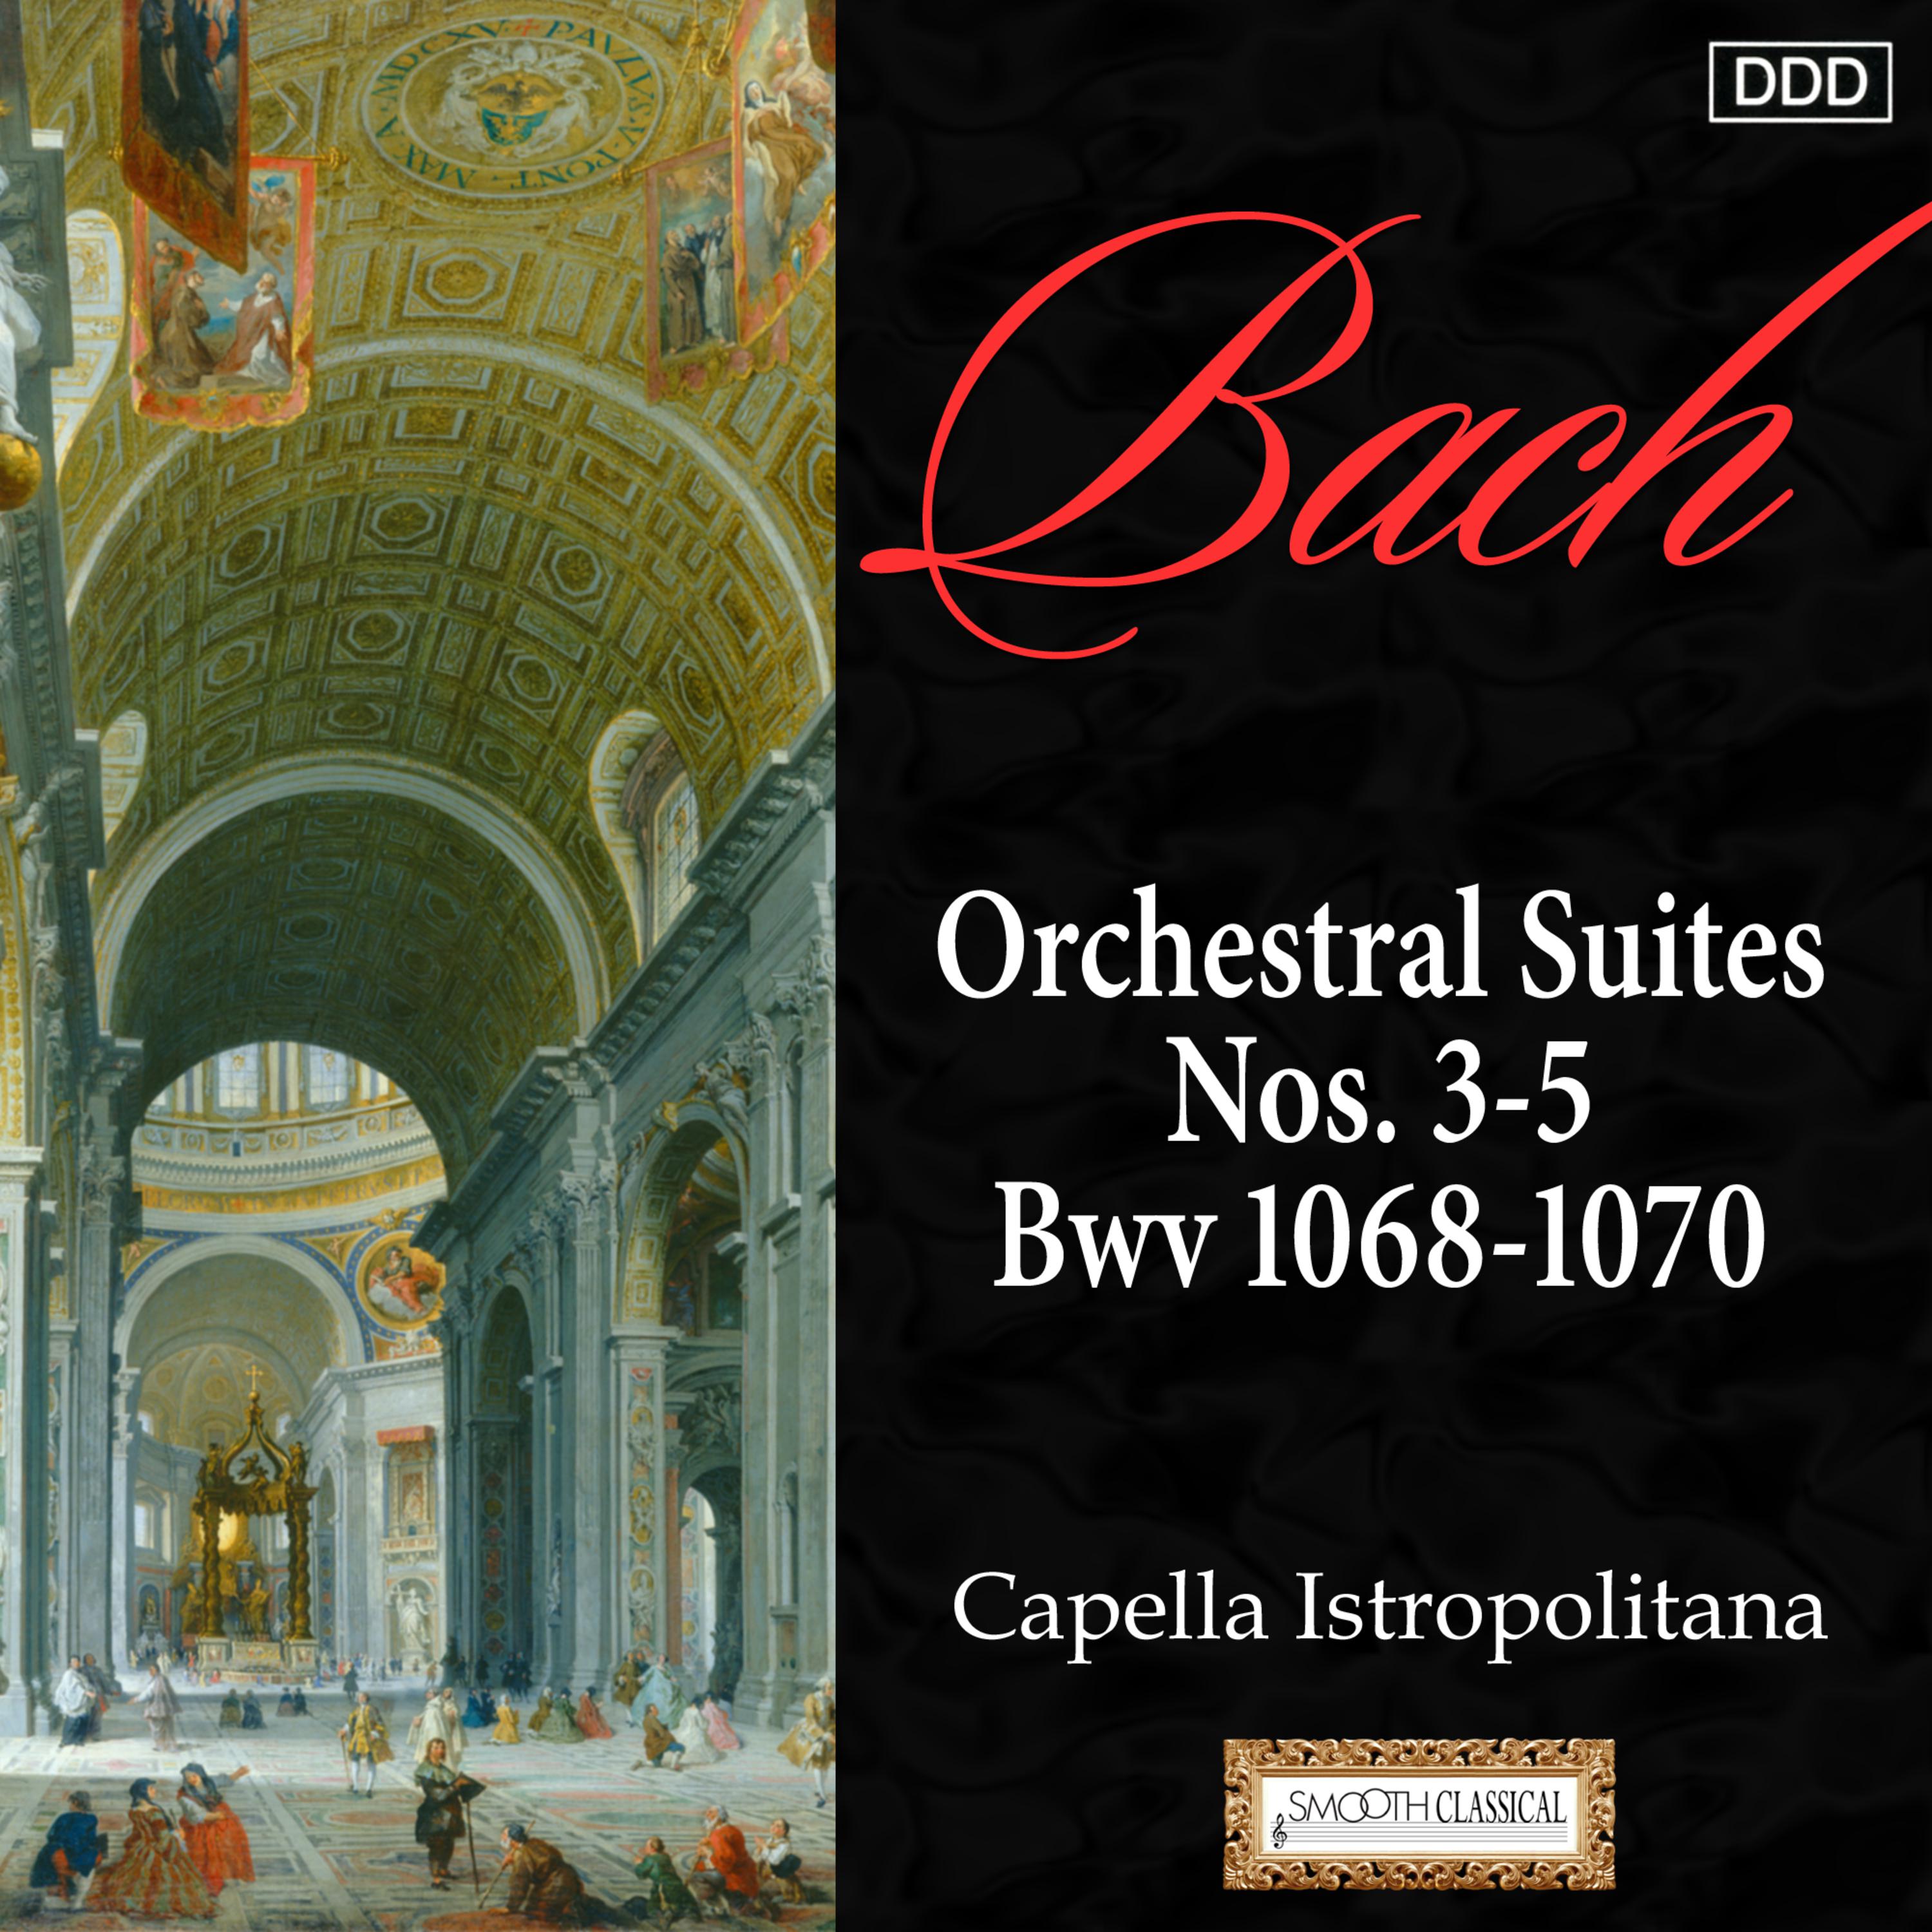 Orchestral Suite No. 4 in D Major, BWV 1069: I. Ouverture